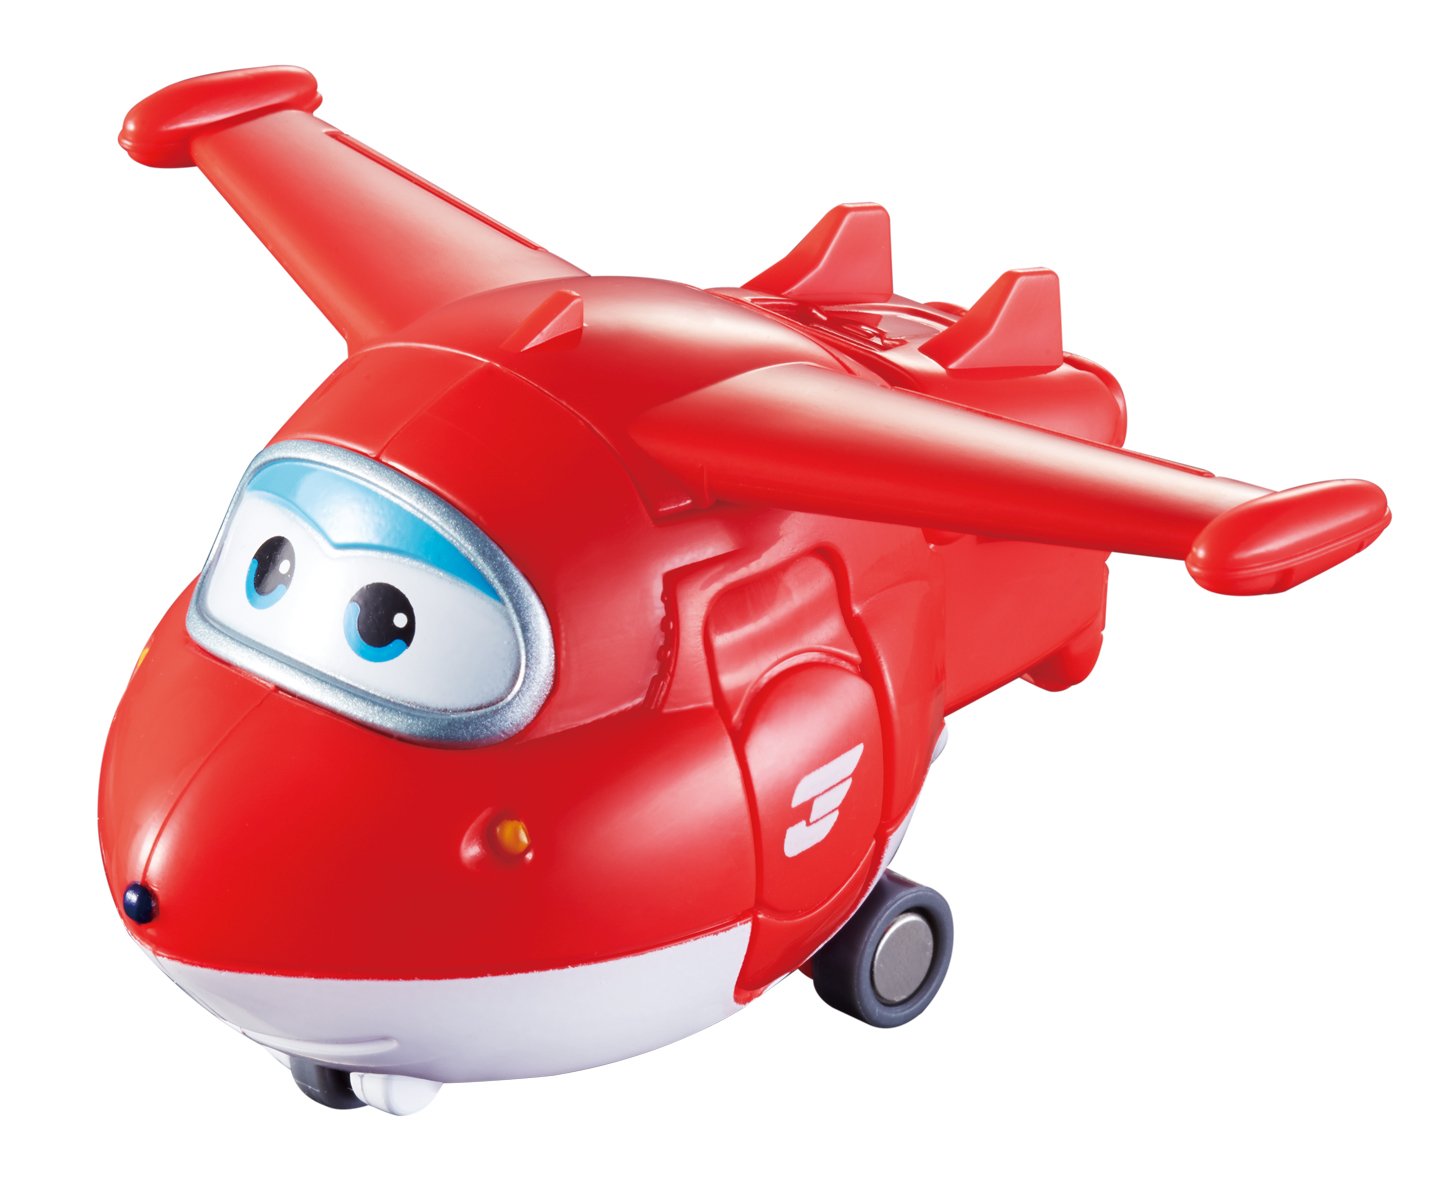 Super Wings Toys, Transformer Toys 2 Inch, Airplane Toy for Kids 3-5 Years Old, 15 Packs Transforming Jet Playset, Real Mobile Wheels, Birthday Party Supplies for Preschool Boys and Girls